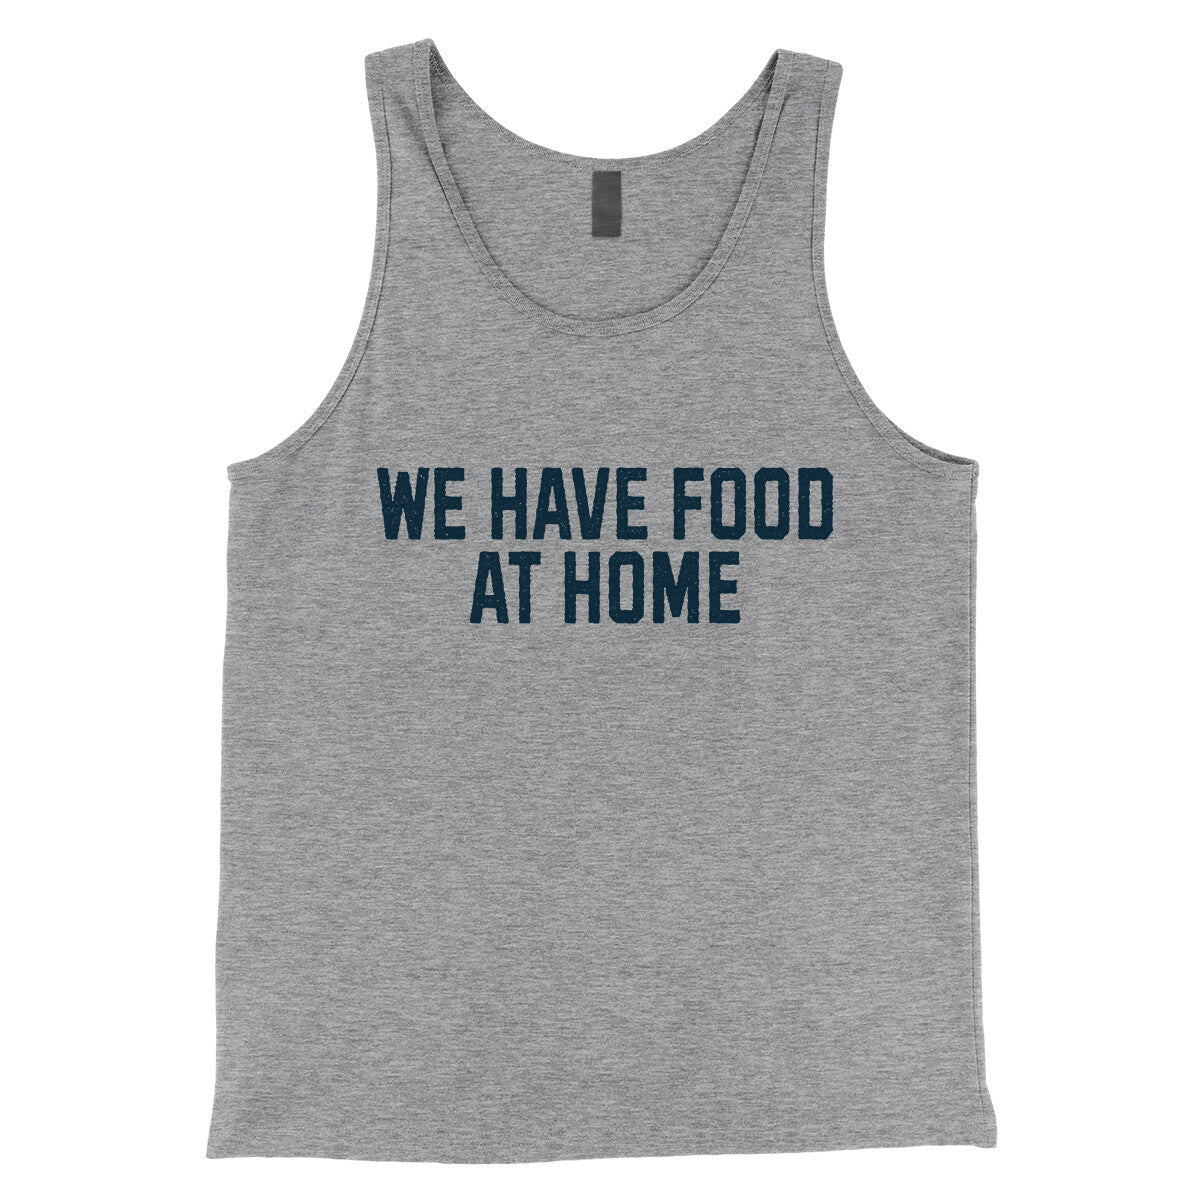 We Have Food at Home in Athletic Heather Color